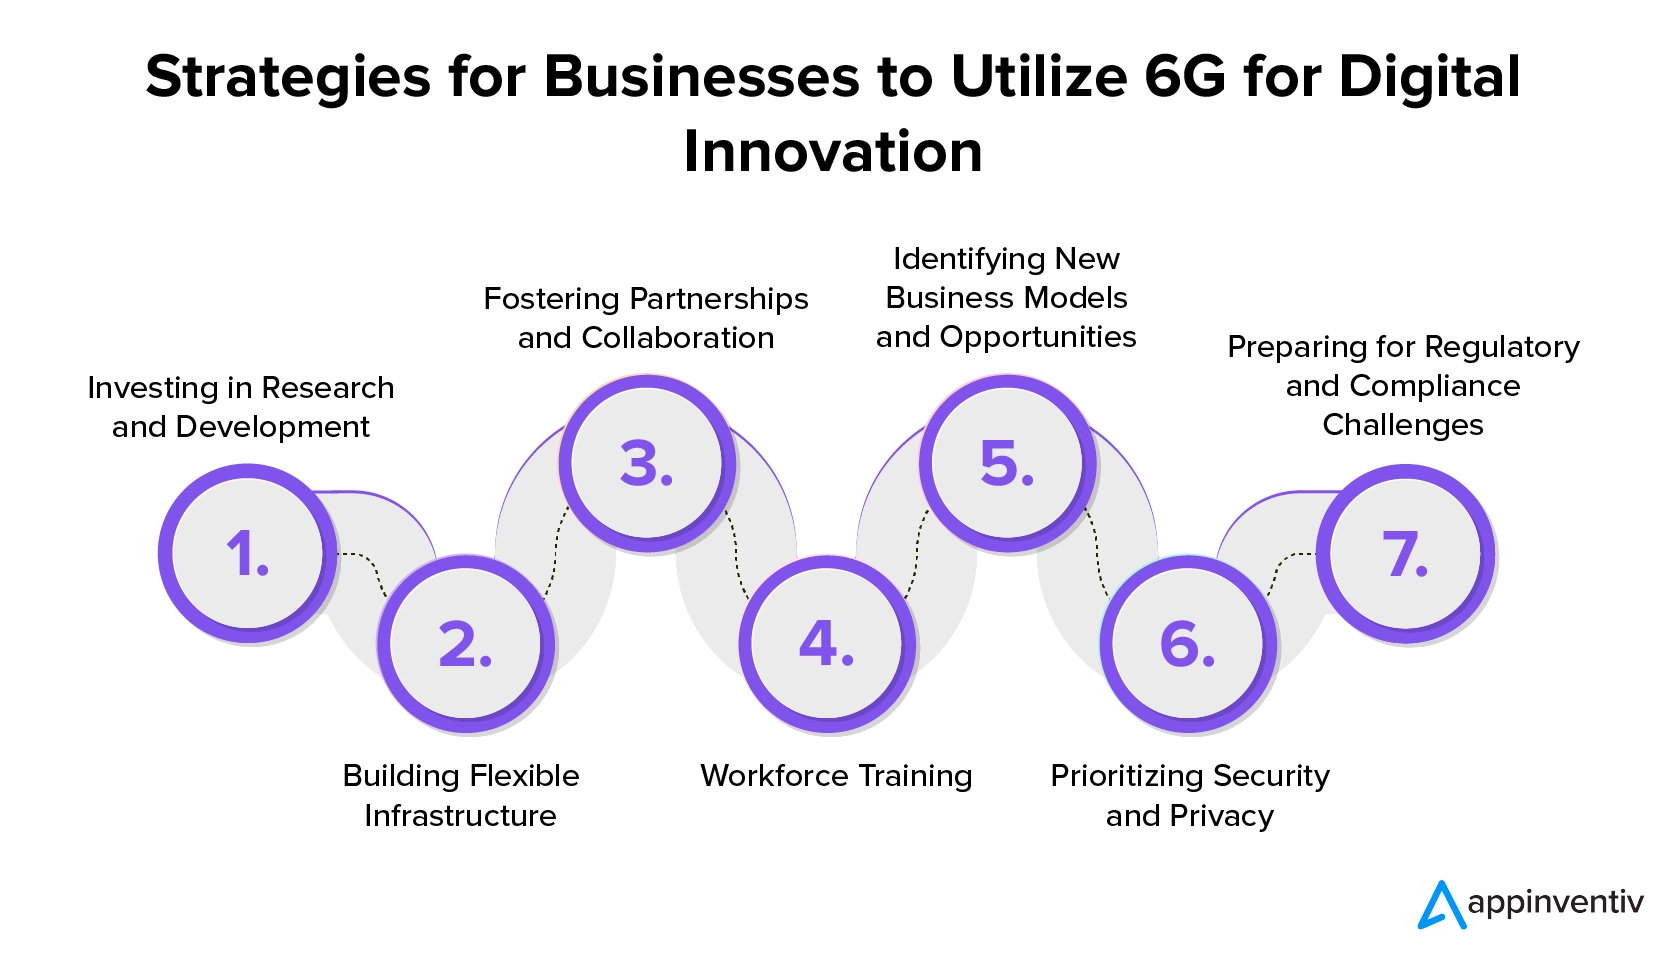 Strategies for Businesses to Utilize 6G for Digital Innovation